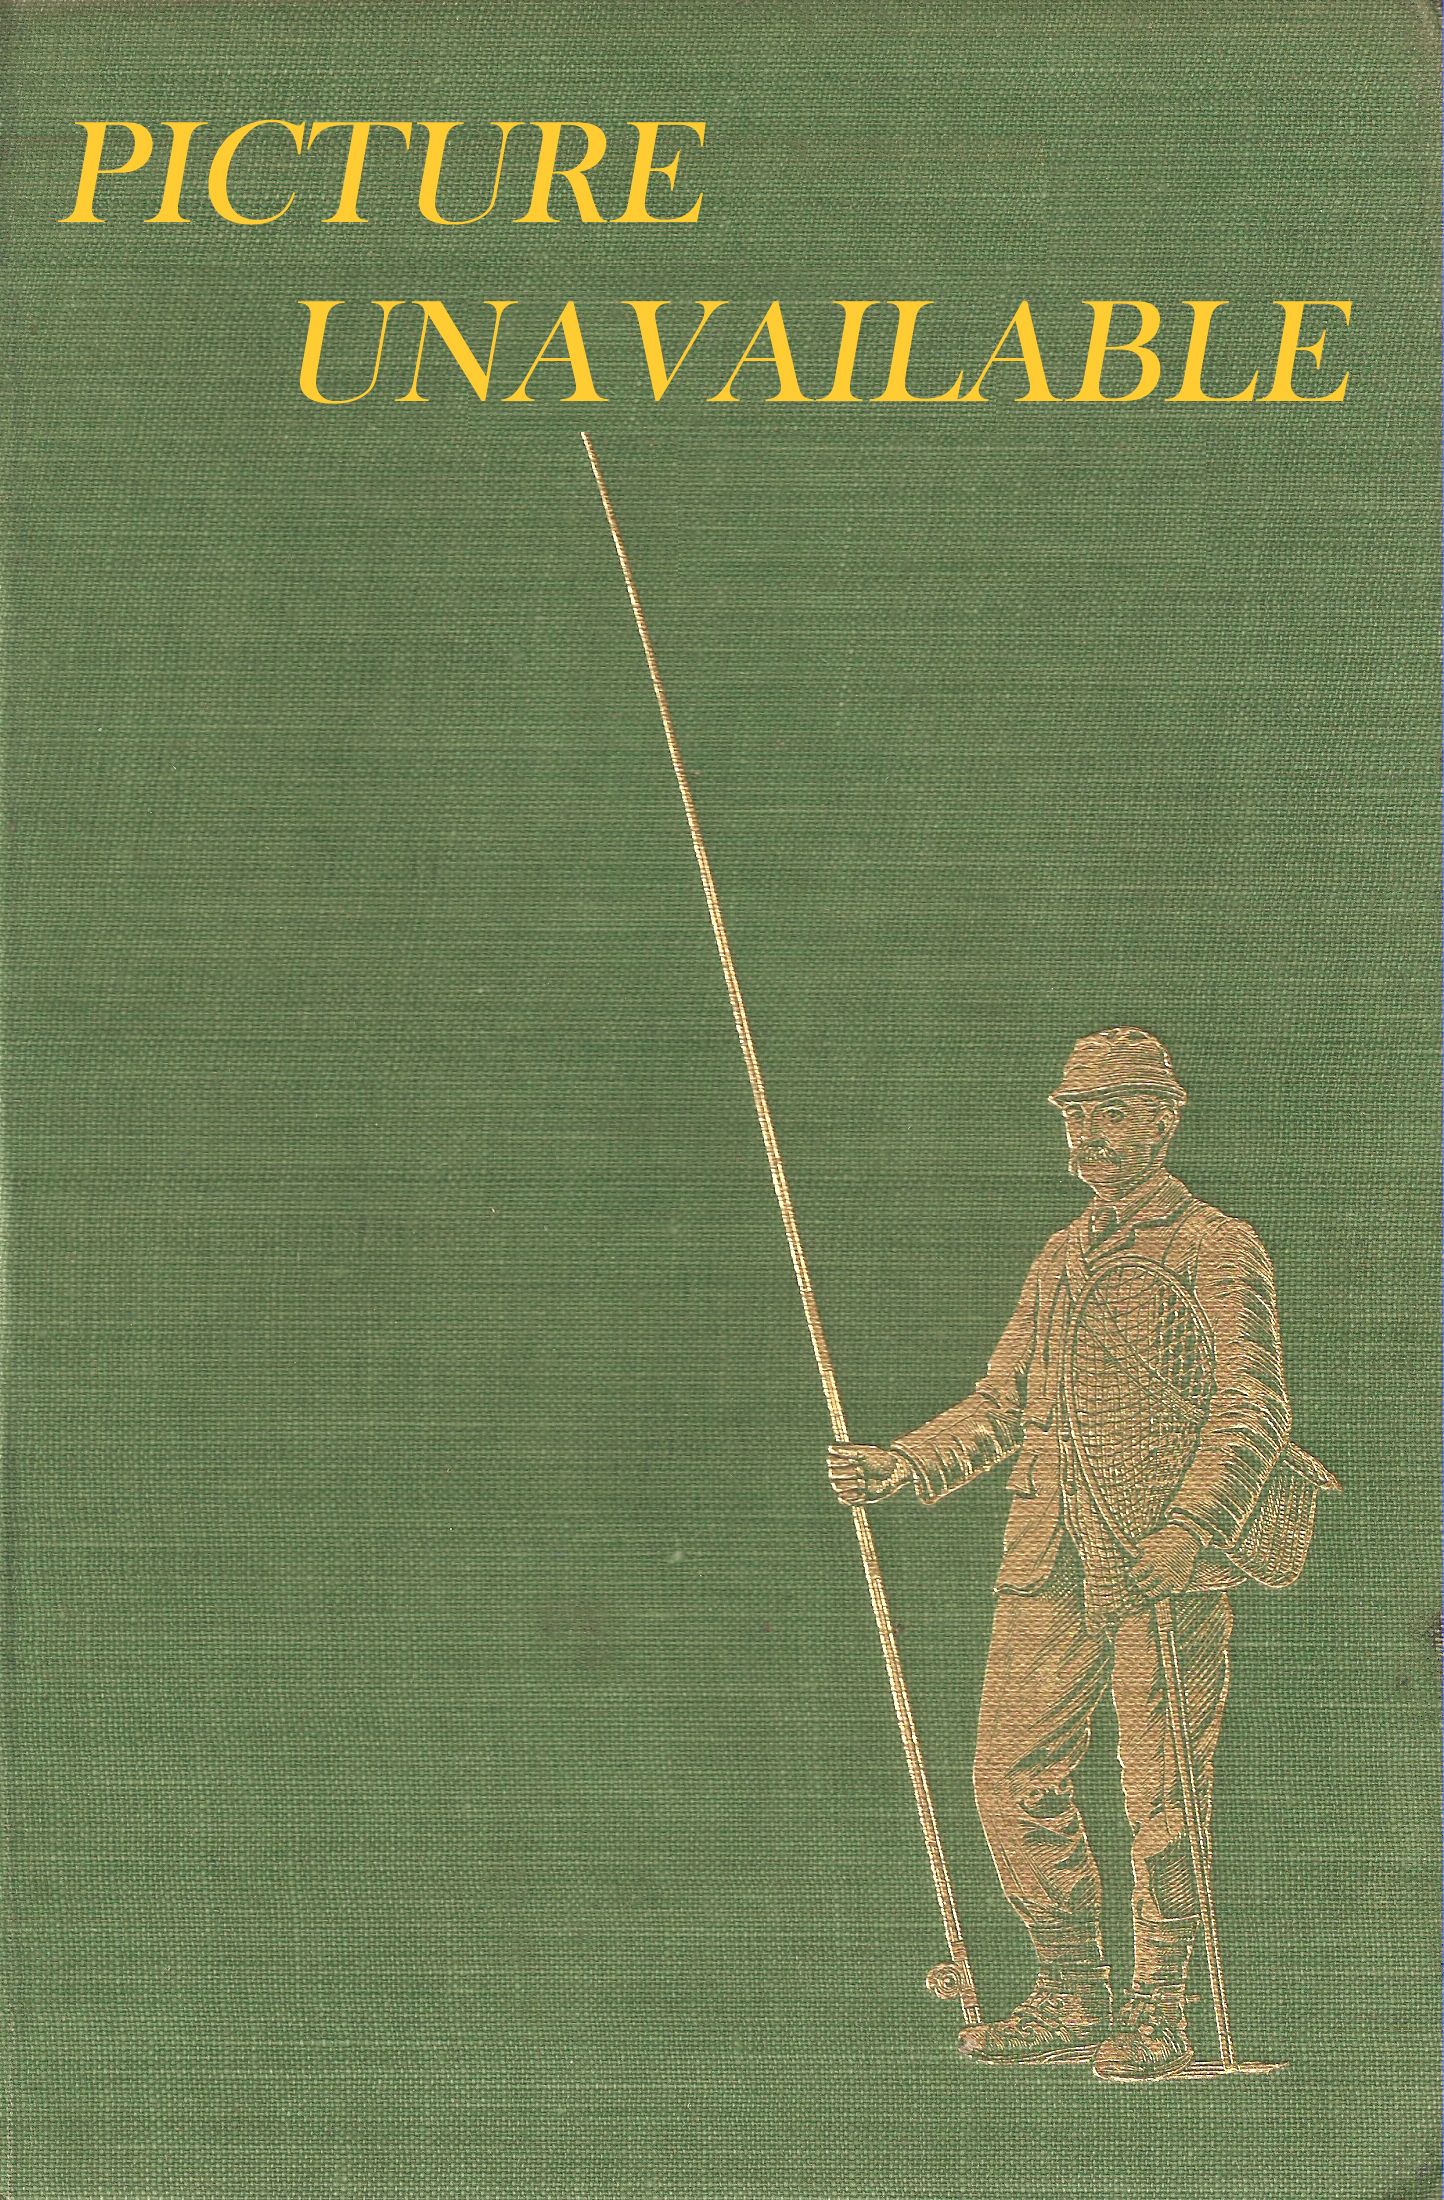 IZAAK WALTON: THE COMPLEAT ANGLER AND HIS TURBULENT TIMES. By J. Lawrence  Pool and Angeline J. Pool.